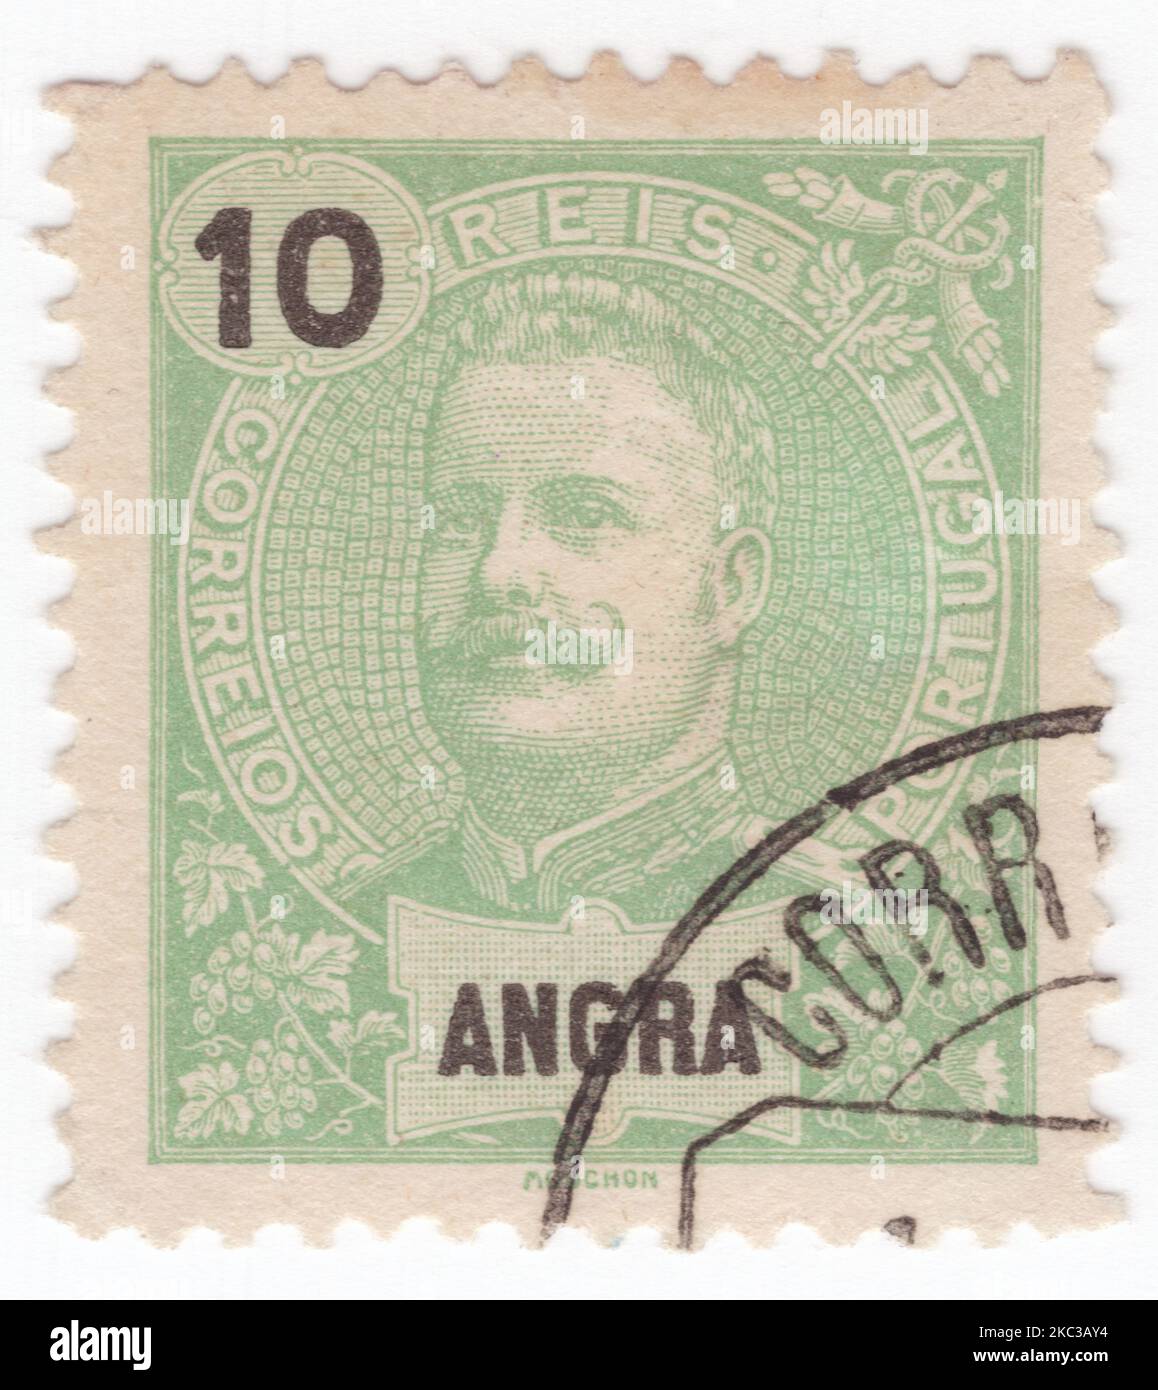 ANGRA - 1897: An 10 reis yellow-green postage stamp showing portrait of Dom Carlos I, known as the Diplomat, the Martyr, and the Oceanographer, among many other names, was the King of Portugal from 1889 until his assassination in 1908 Stock Photo